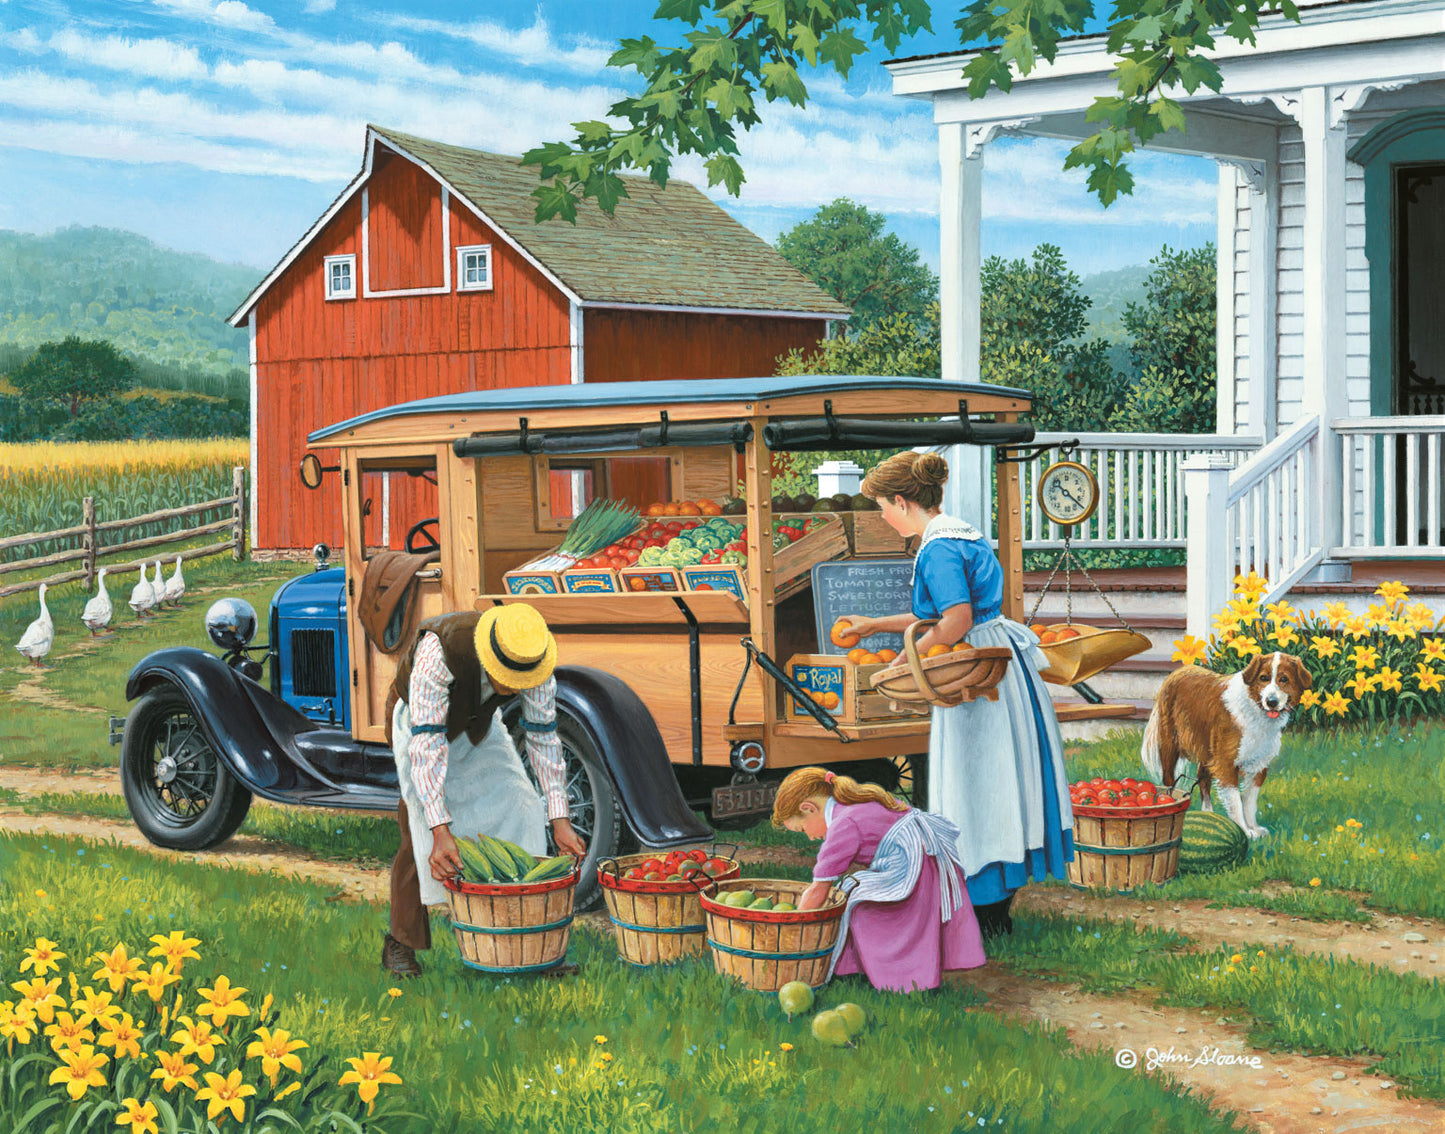 Shop at Home - Puzzle by John Sloane